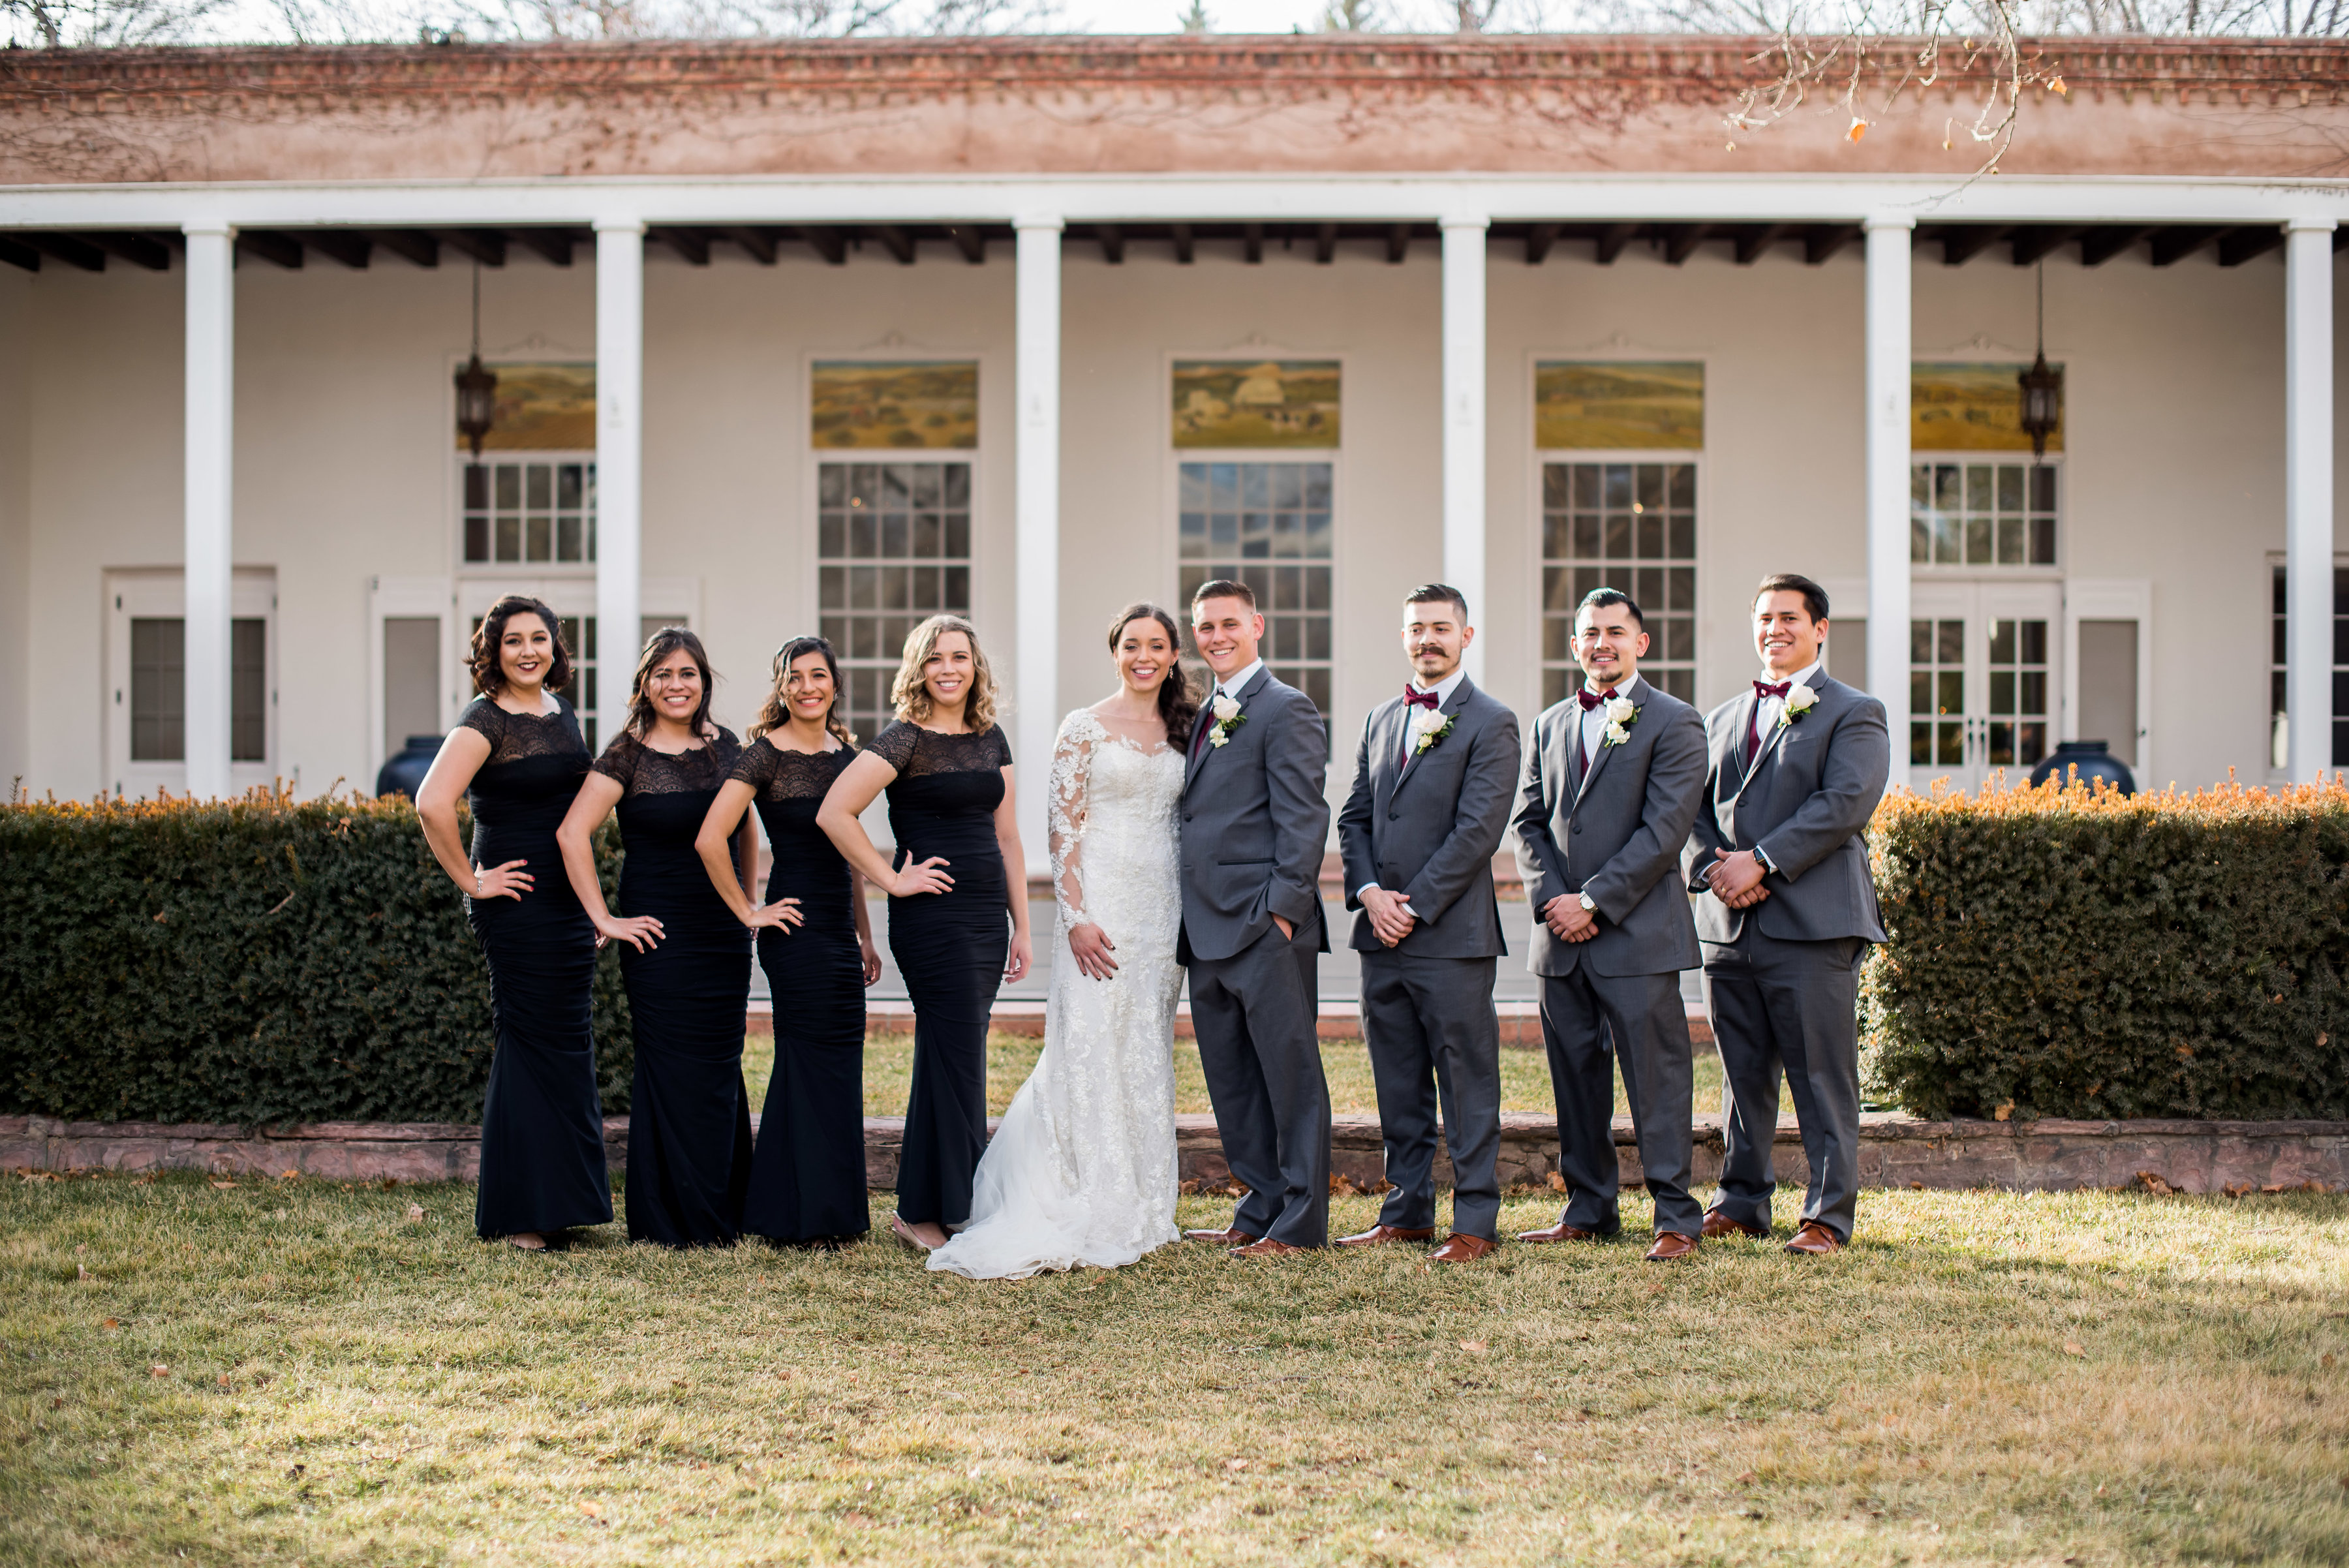 wedding planning design decor inspo real local New Mexico Perfect Wedding Guide party bridesmaids groomsmen lace long sleeve group outdoor natural light bride groom love romantic professional